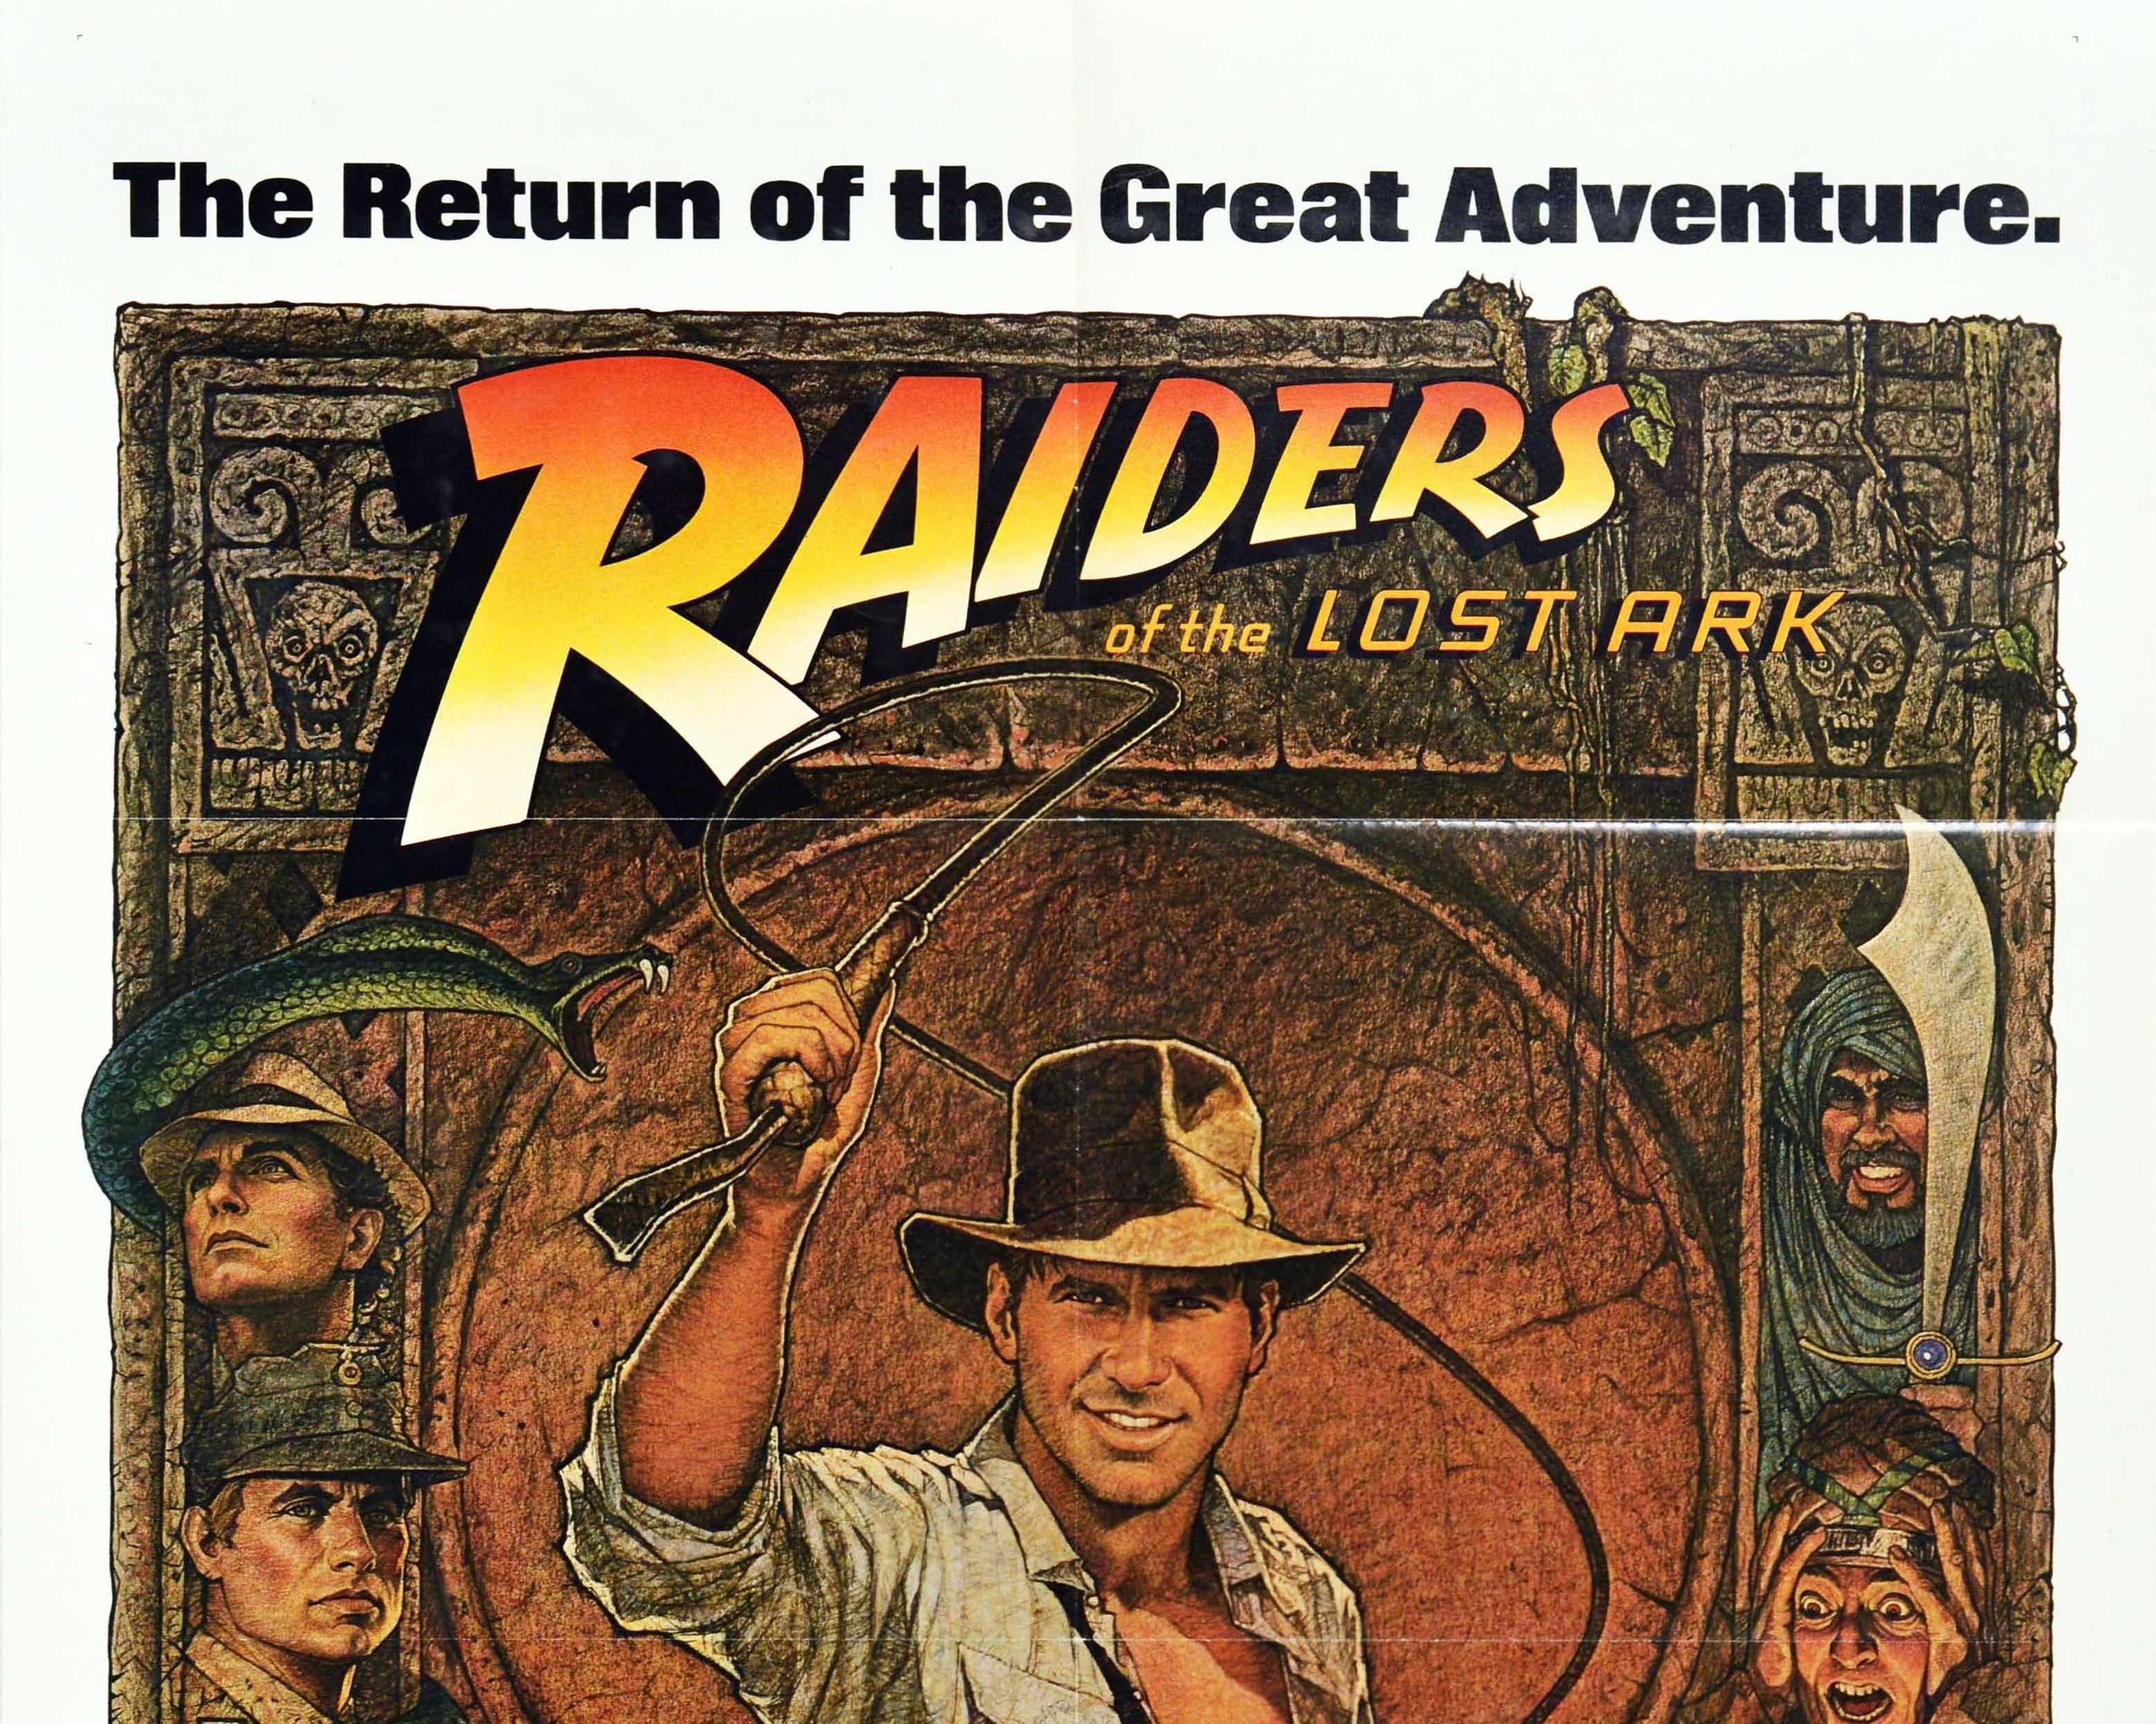 Original vintage movie poster for the re-release of one of the highest grossing films ever made Raiders of the Lost Ark starring Harrison Ford as the adventurous archaeologist Indiana Jones with Karen Allen as Marion, Paul Freeman, Ronald Lacey,